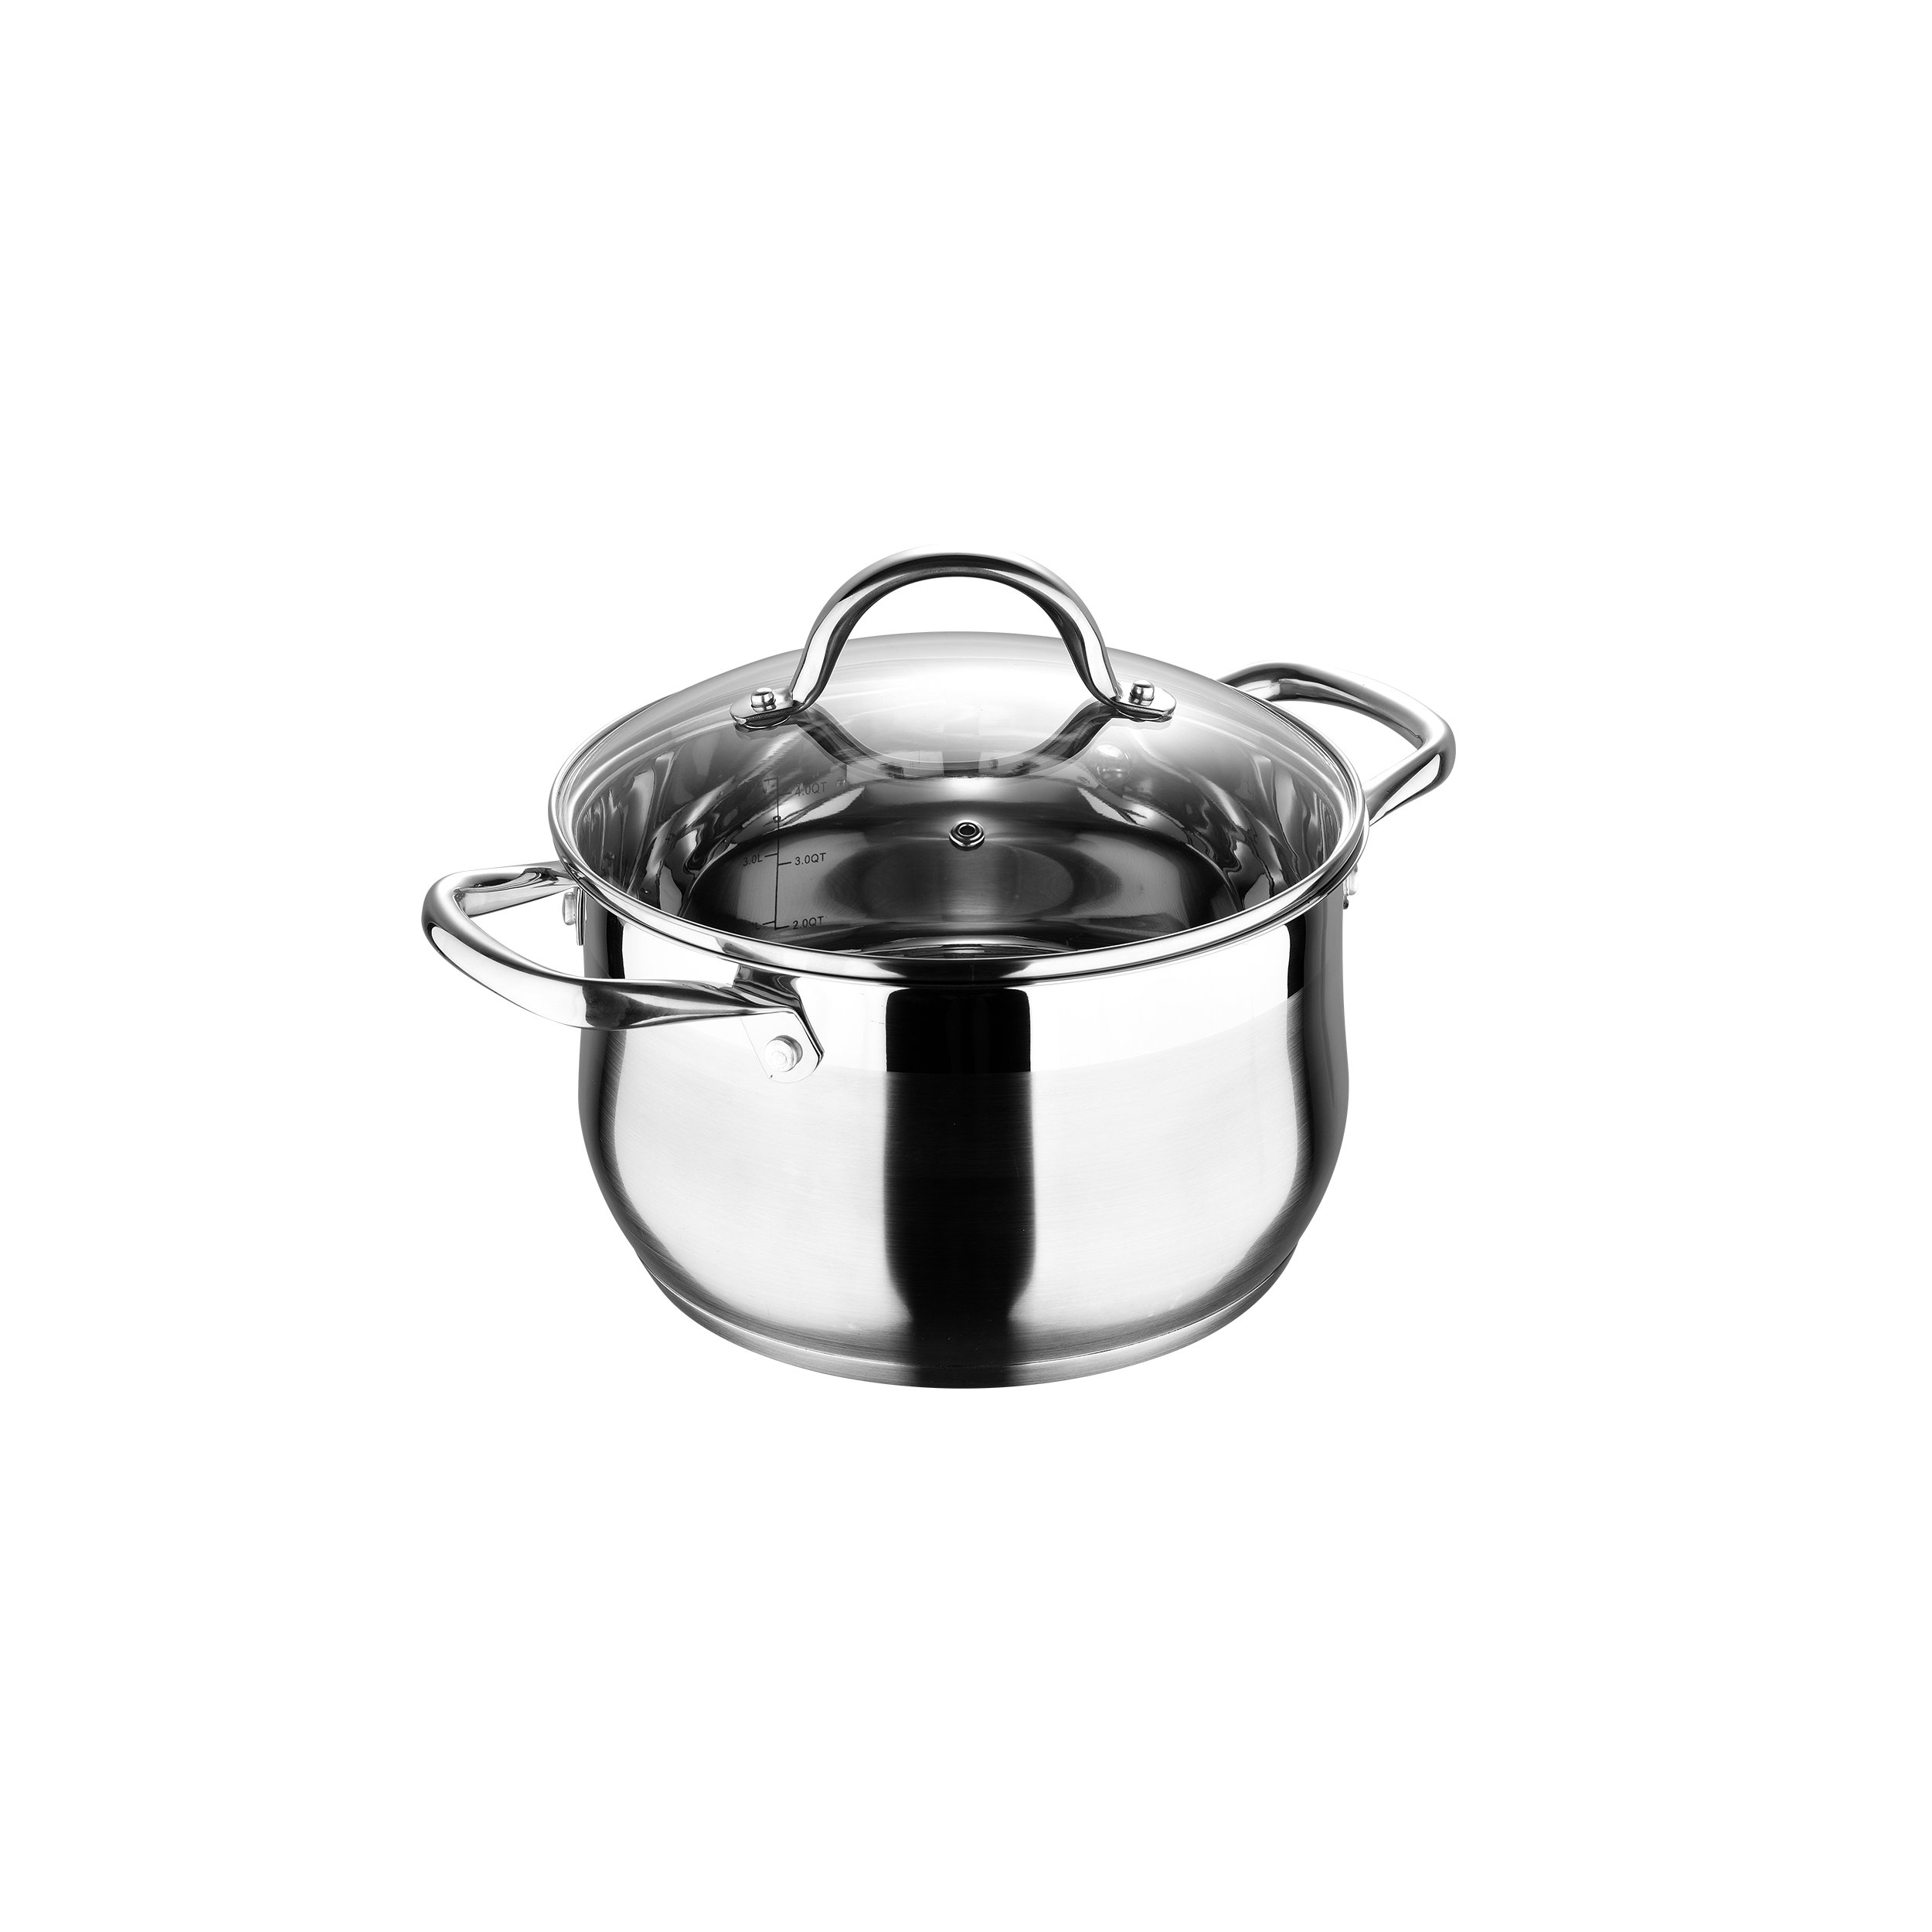 New CALPHALON 3-Ply Stainless Steel 5Qt Stockpot Dutch Oven with Glass Lid  Cover